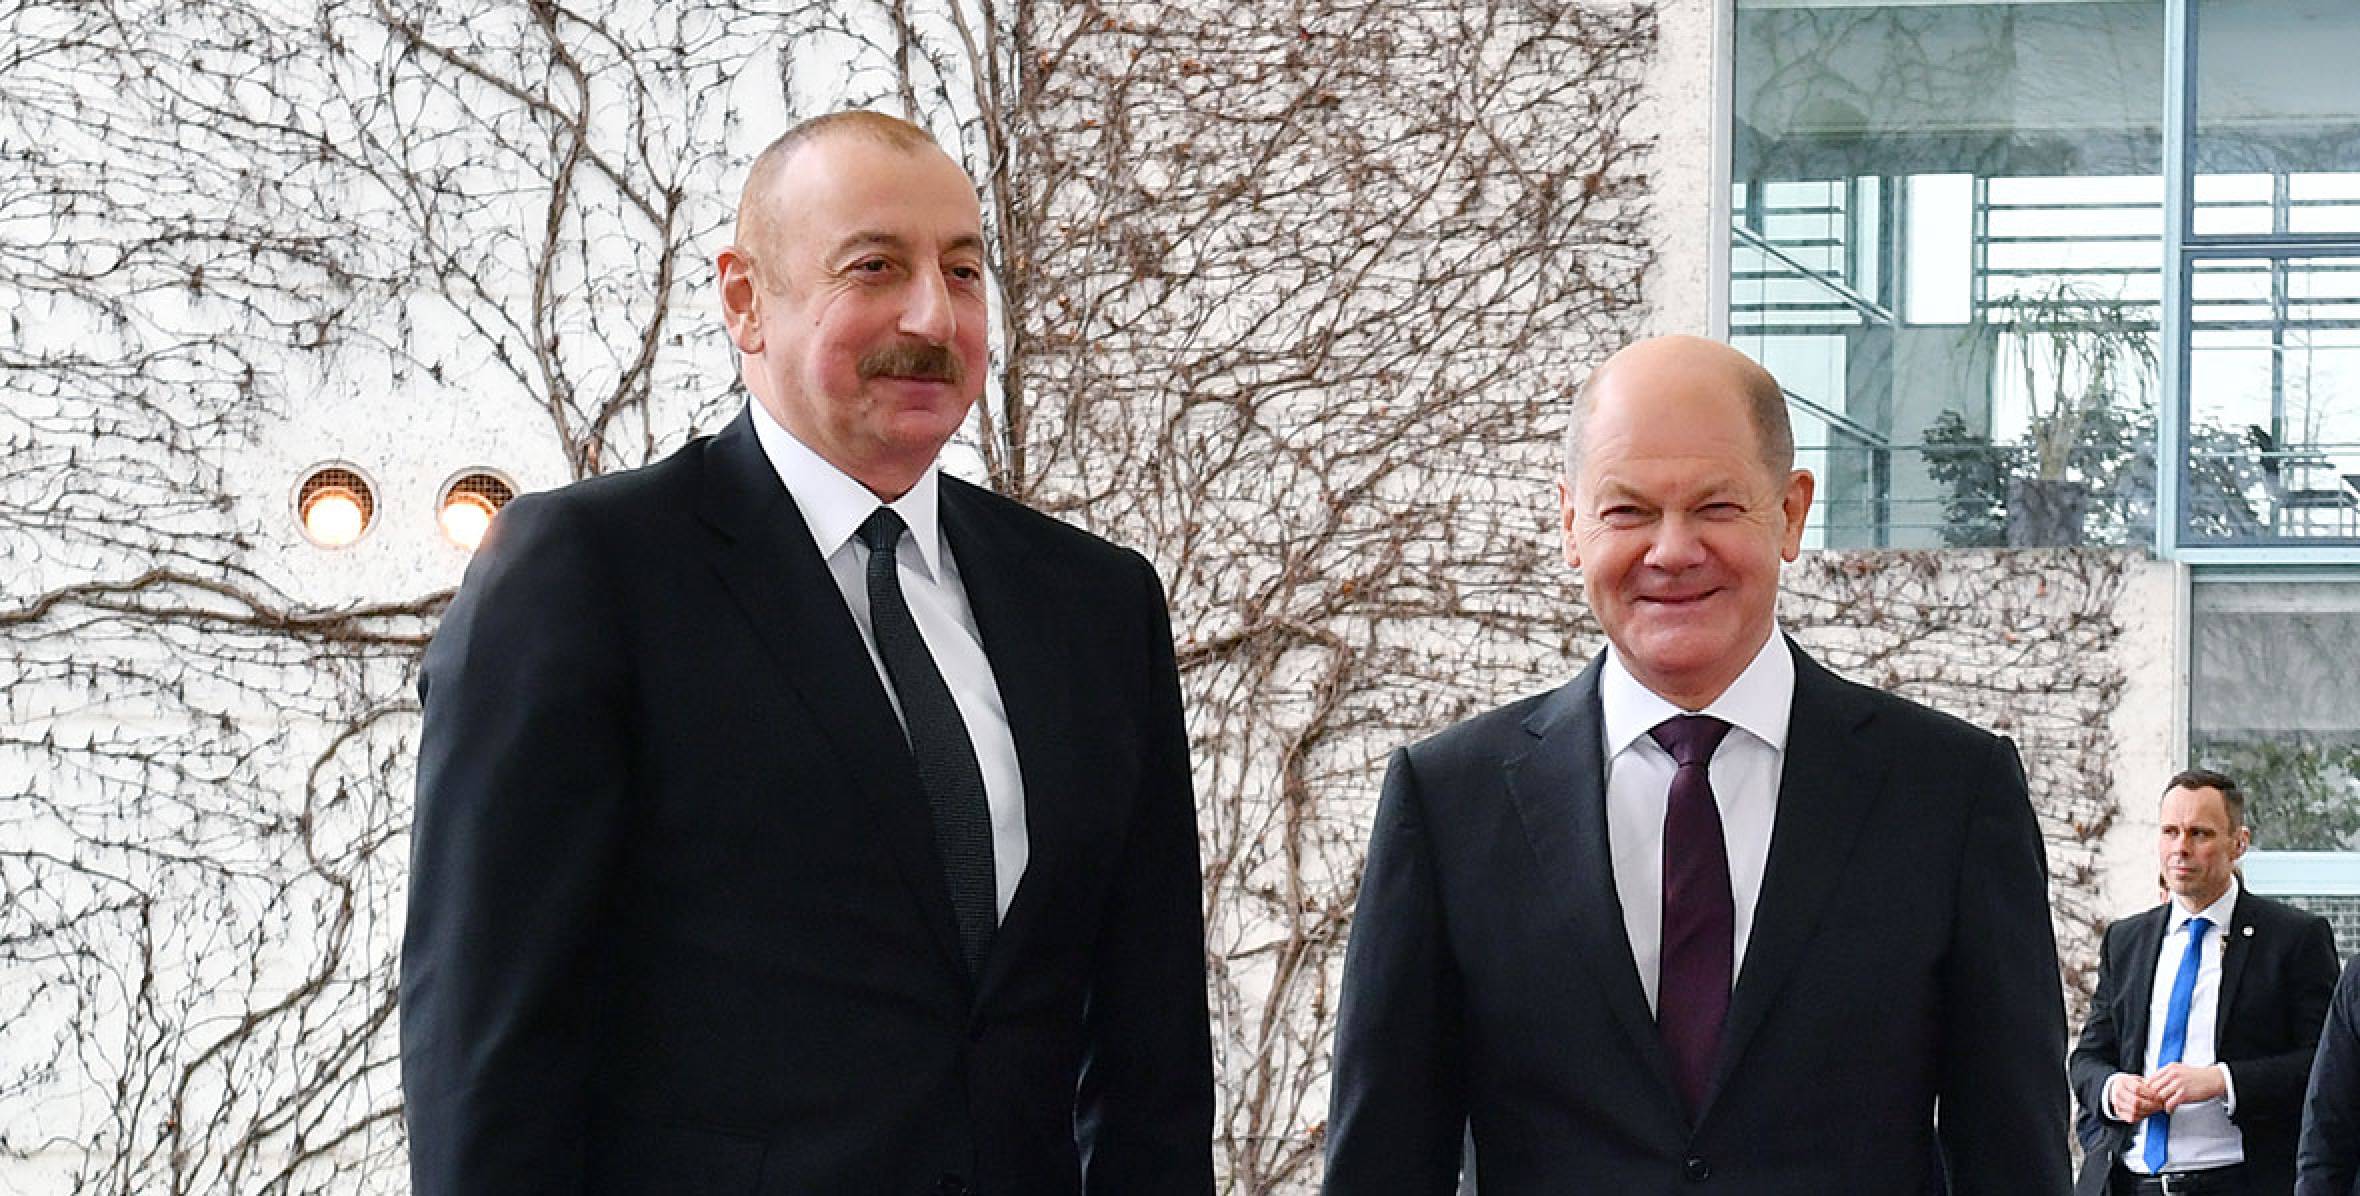 Ilham Aliyev held one-one-one meeting with Chancellor of Germany Olaf Scholz in Berlin